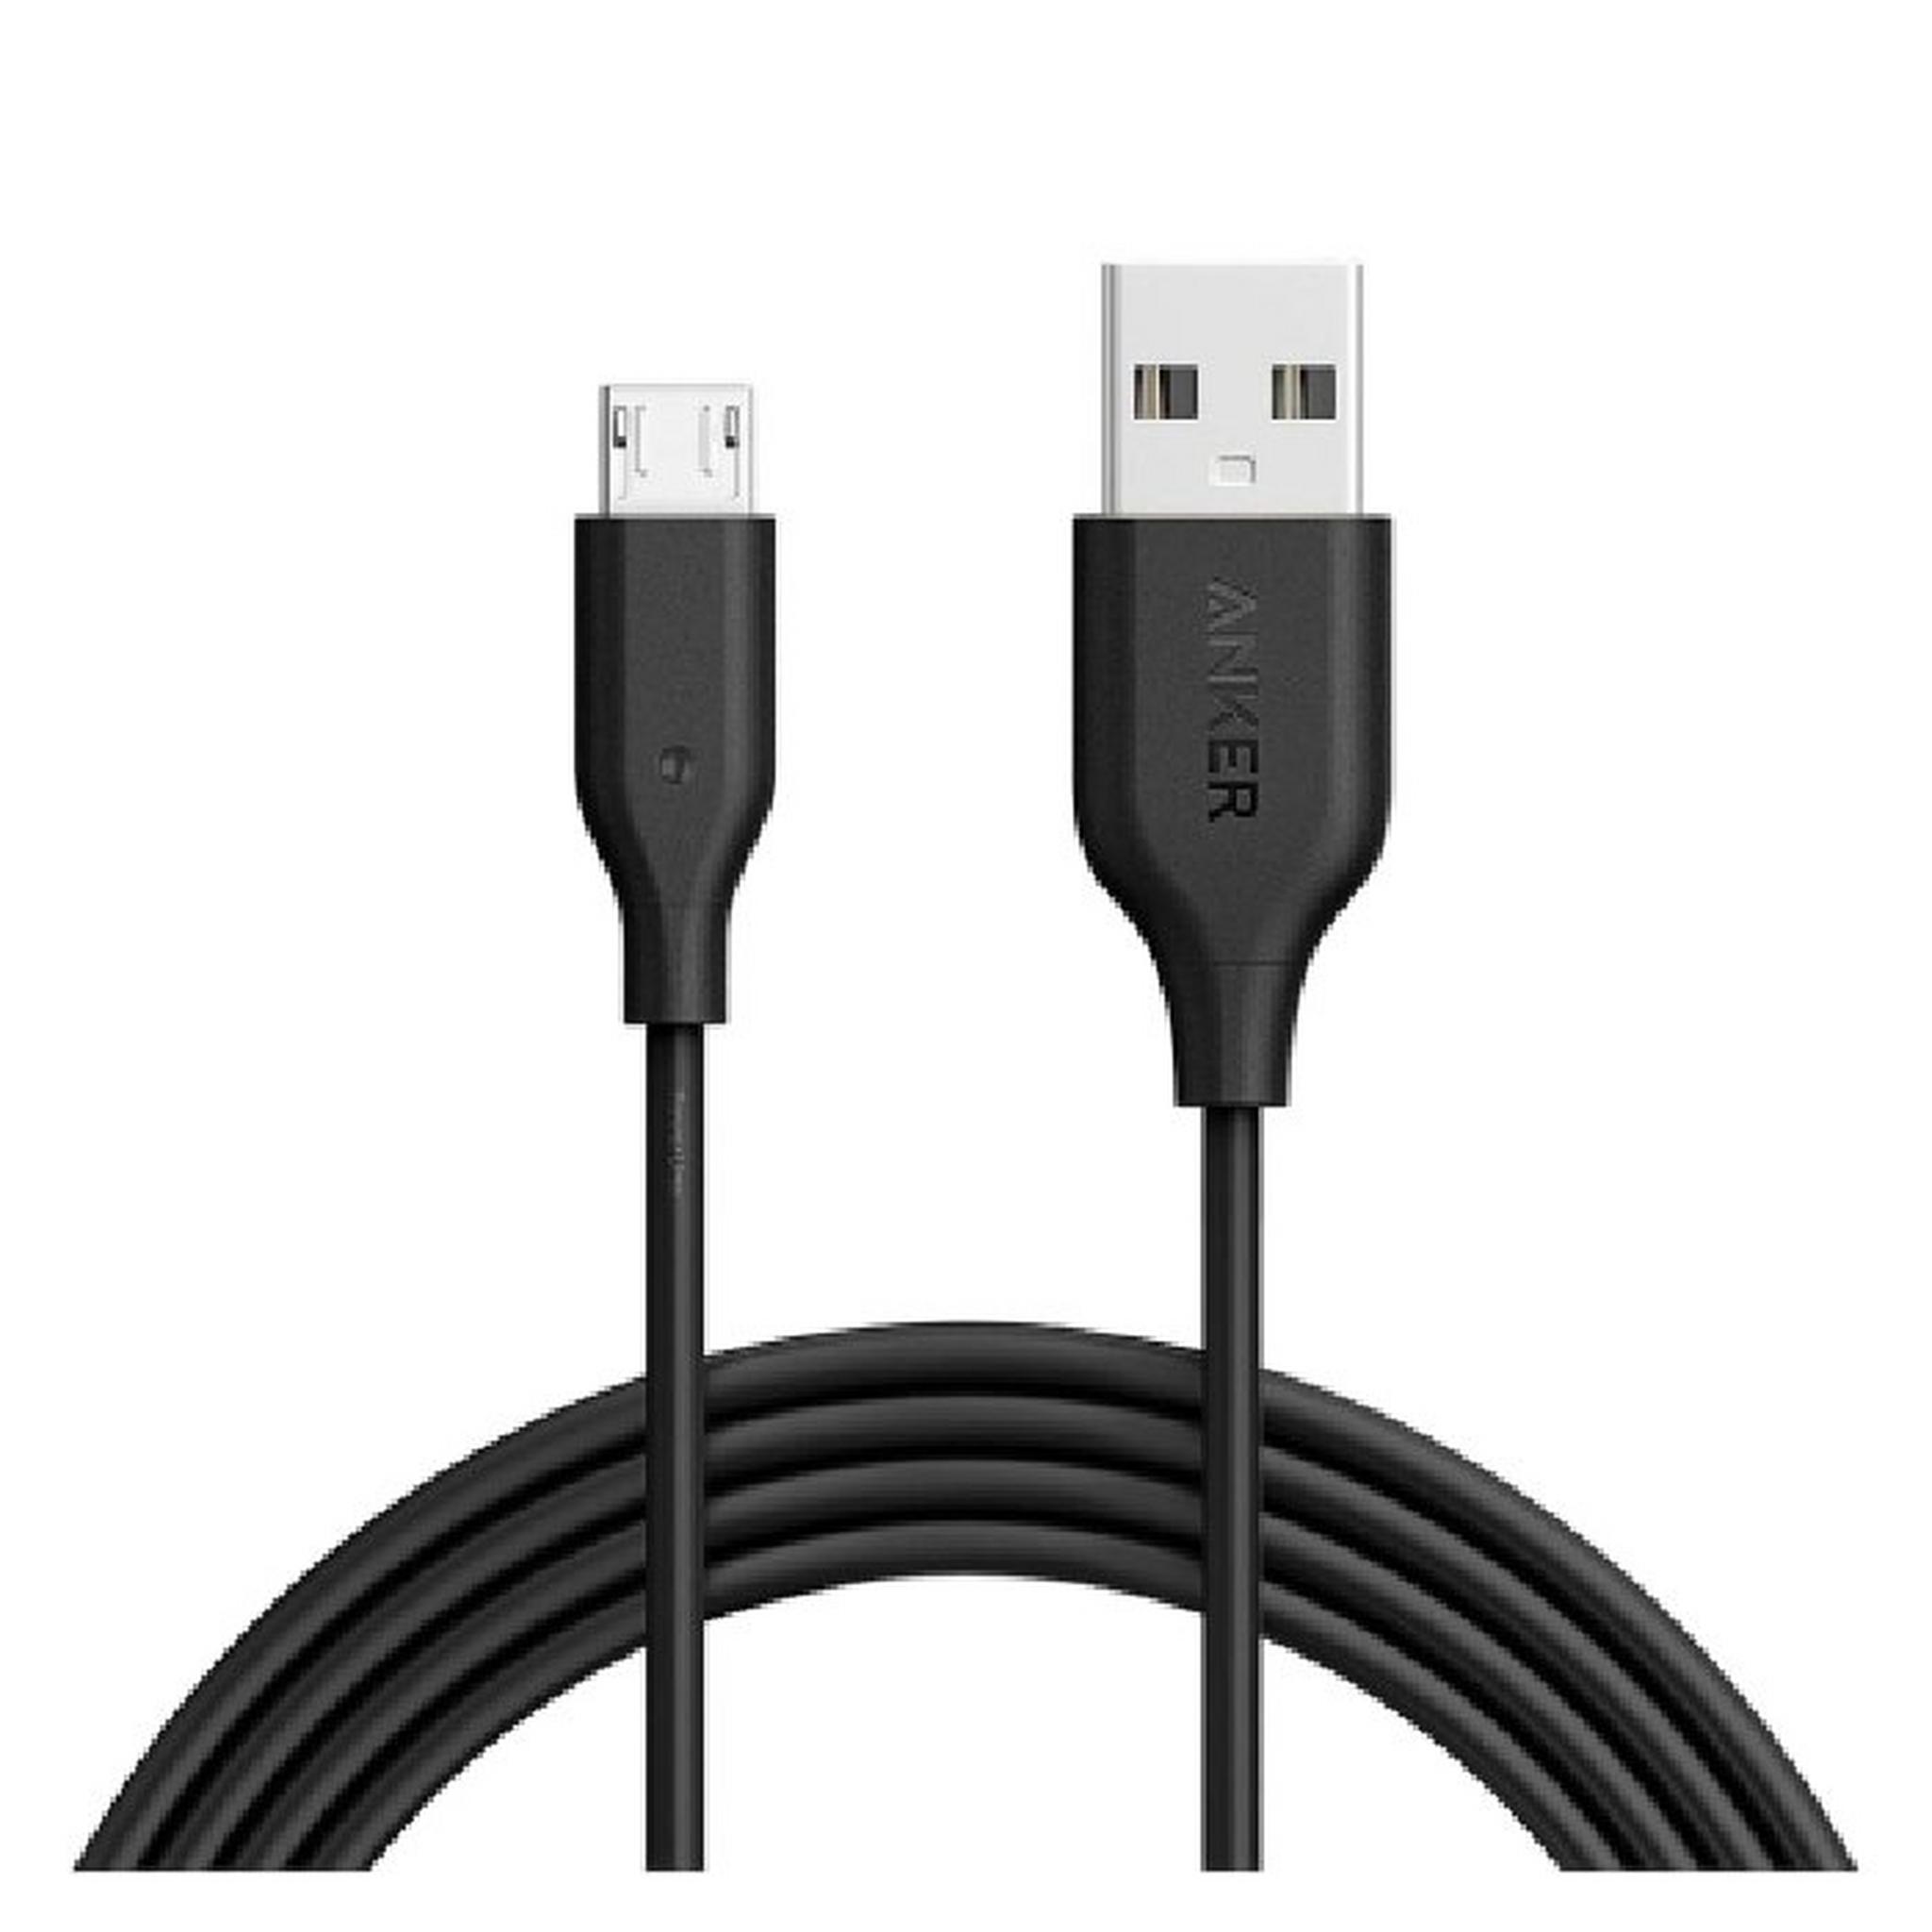 Anker Powerline 1.8 Meters Micro-USB Cable (A8133H12) - Black